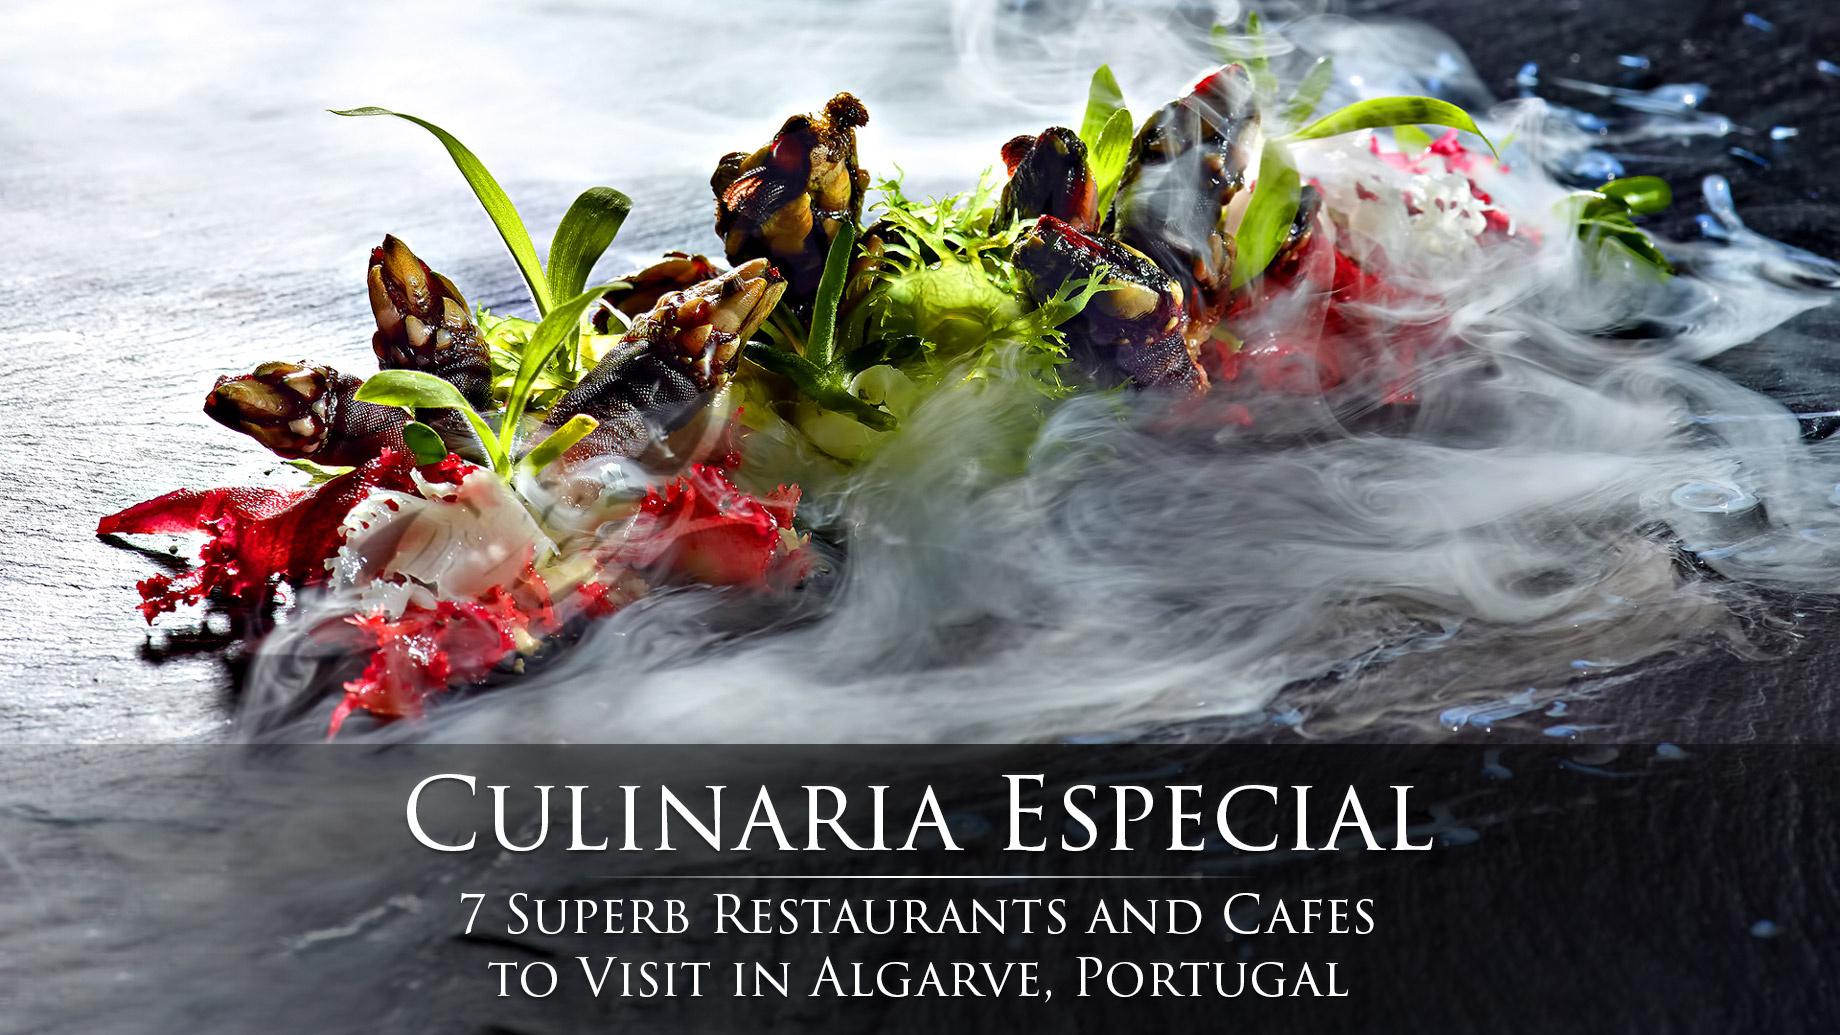 Culinaria Especial - 7 Superb Restaurants and Cafes to Visit in Algarve, Portugal